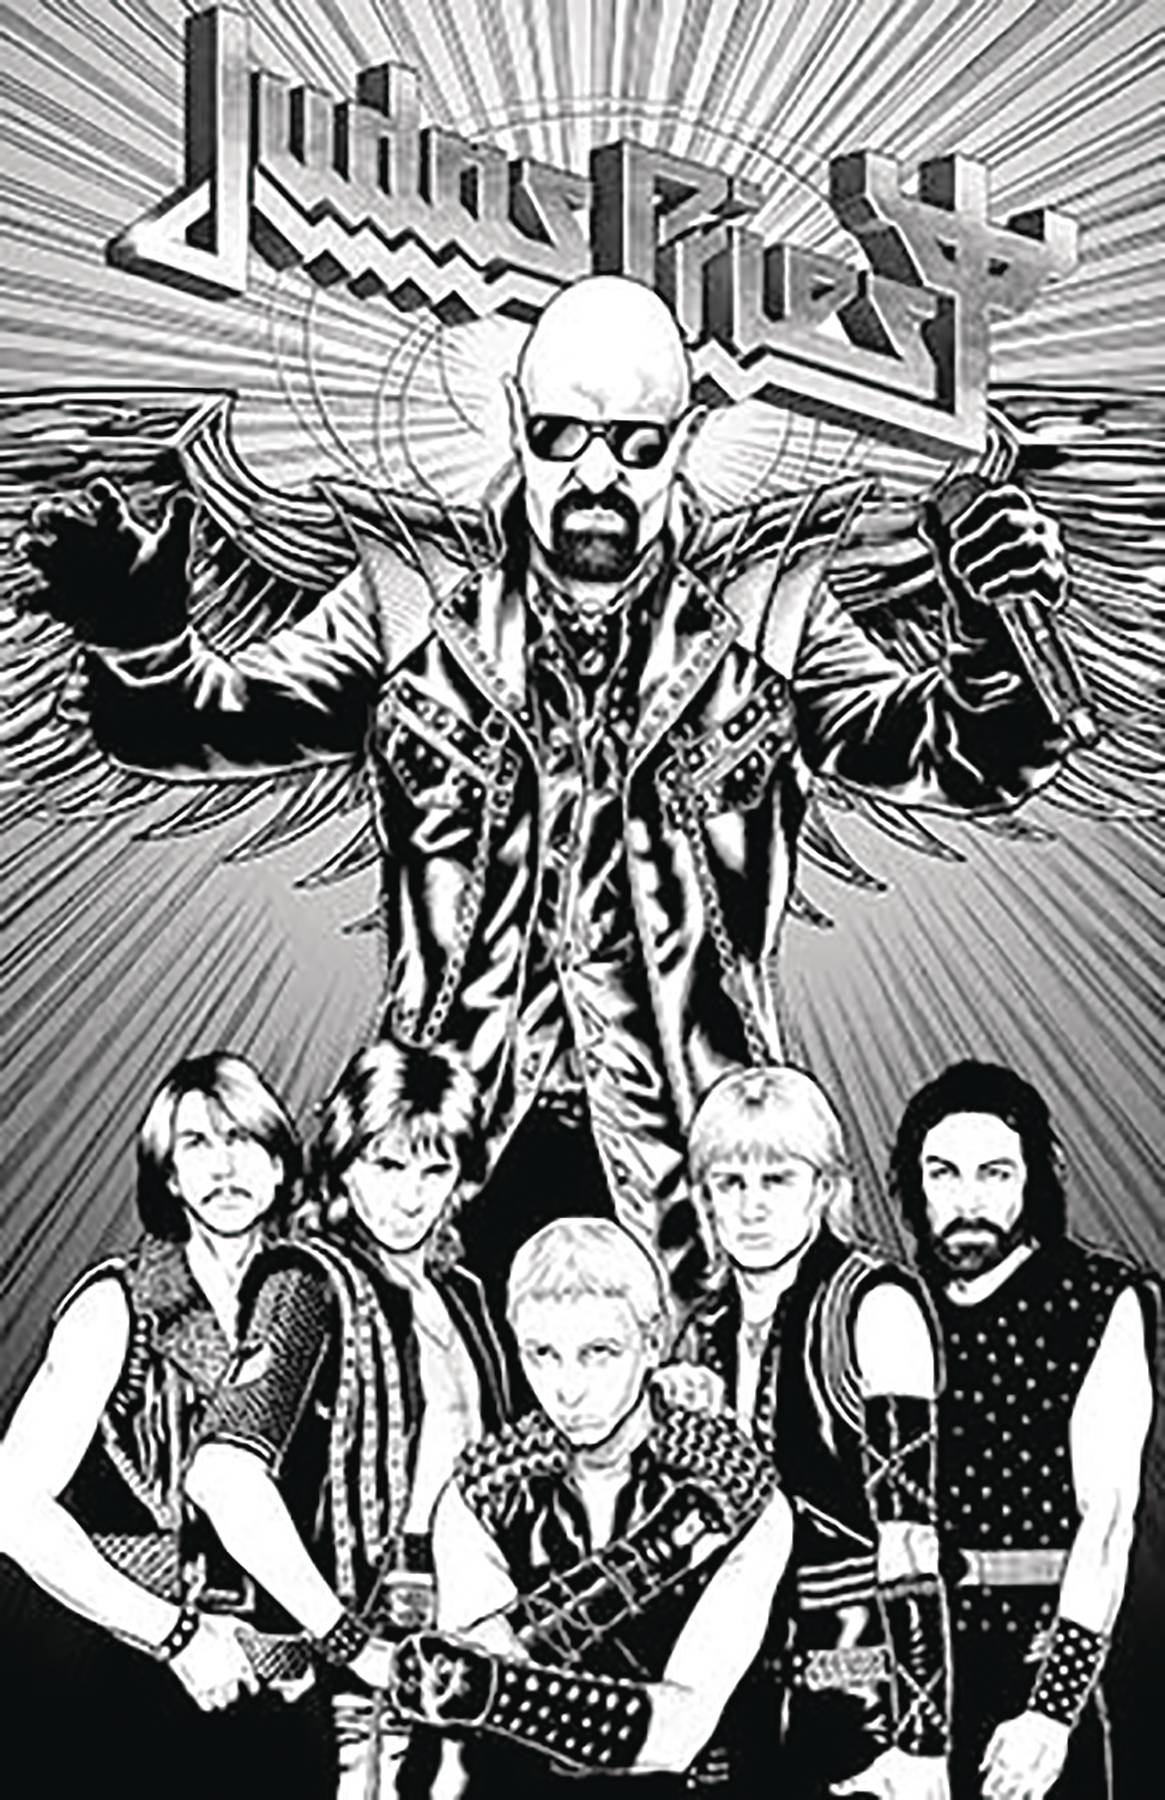 FEATURE] HEAVY ROOTS - Judas Priest